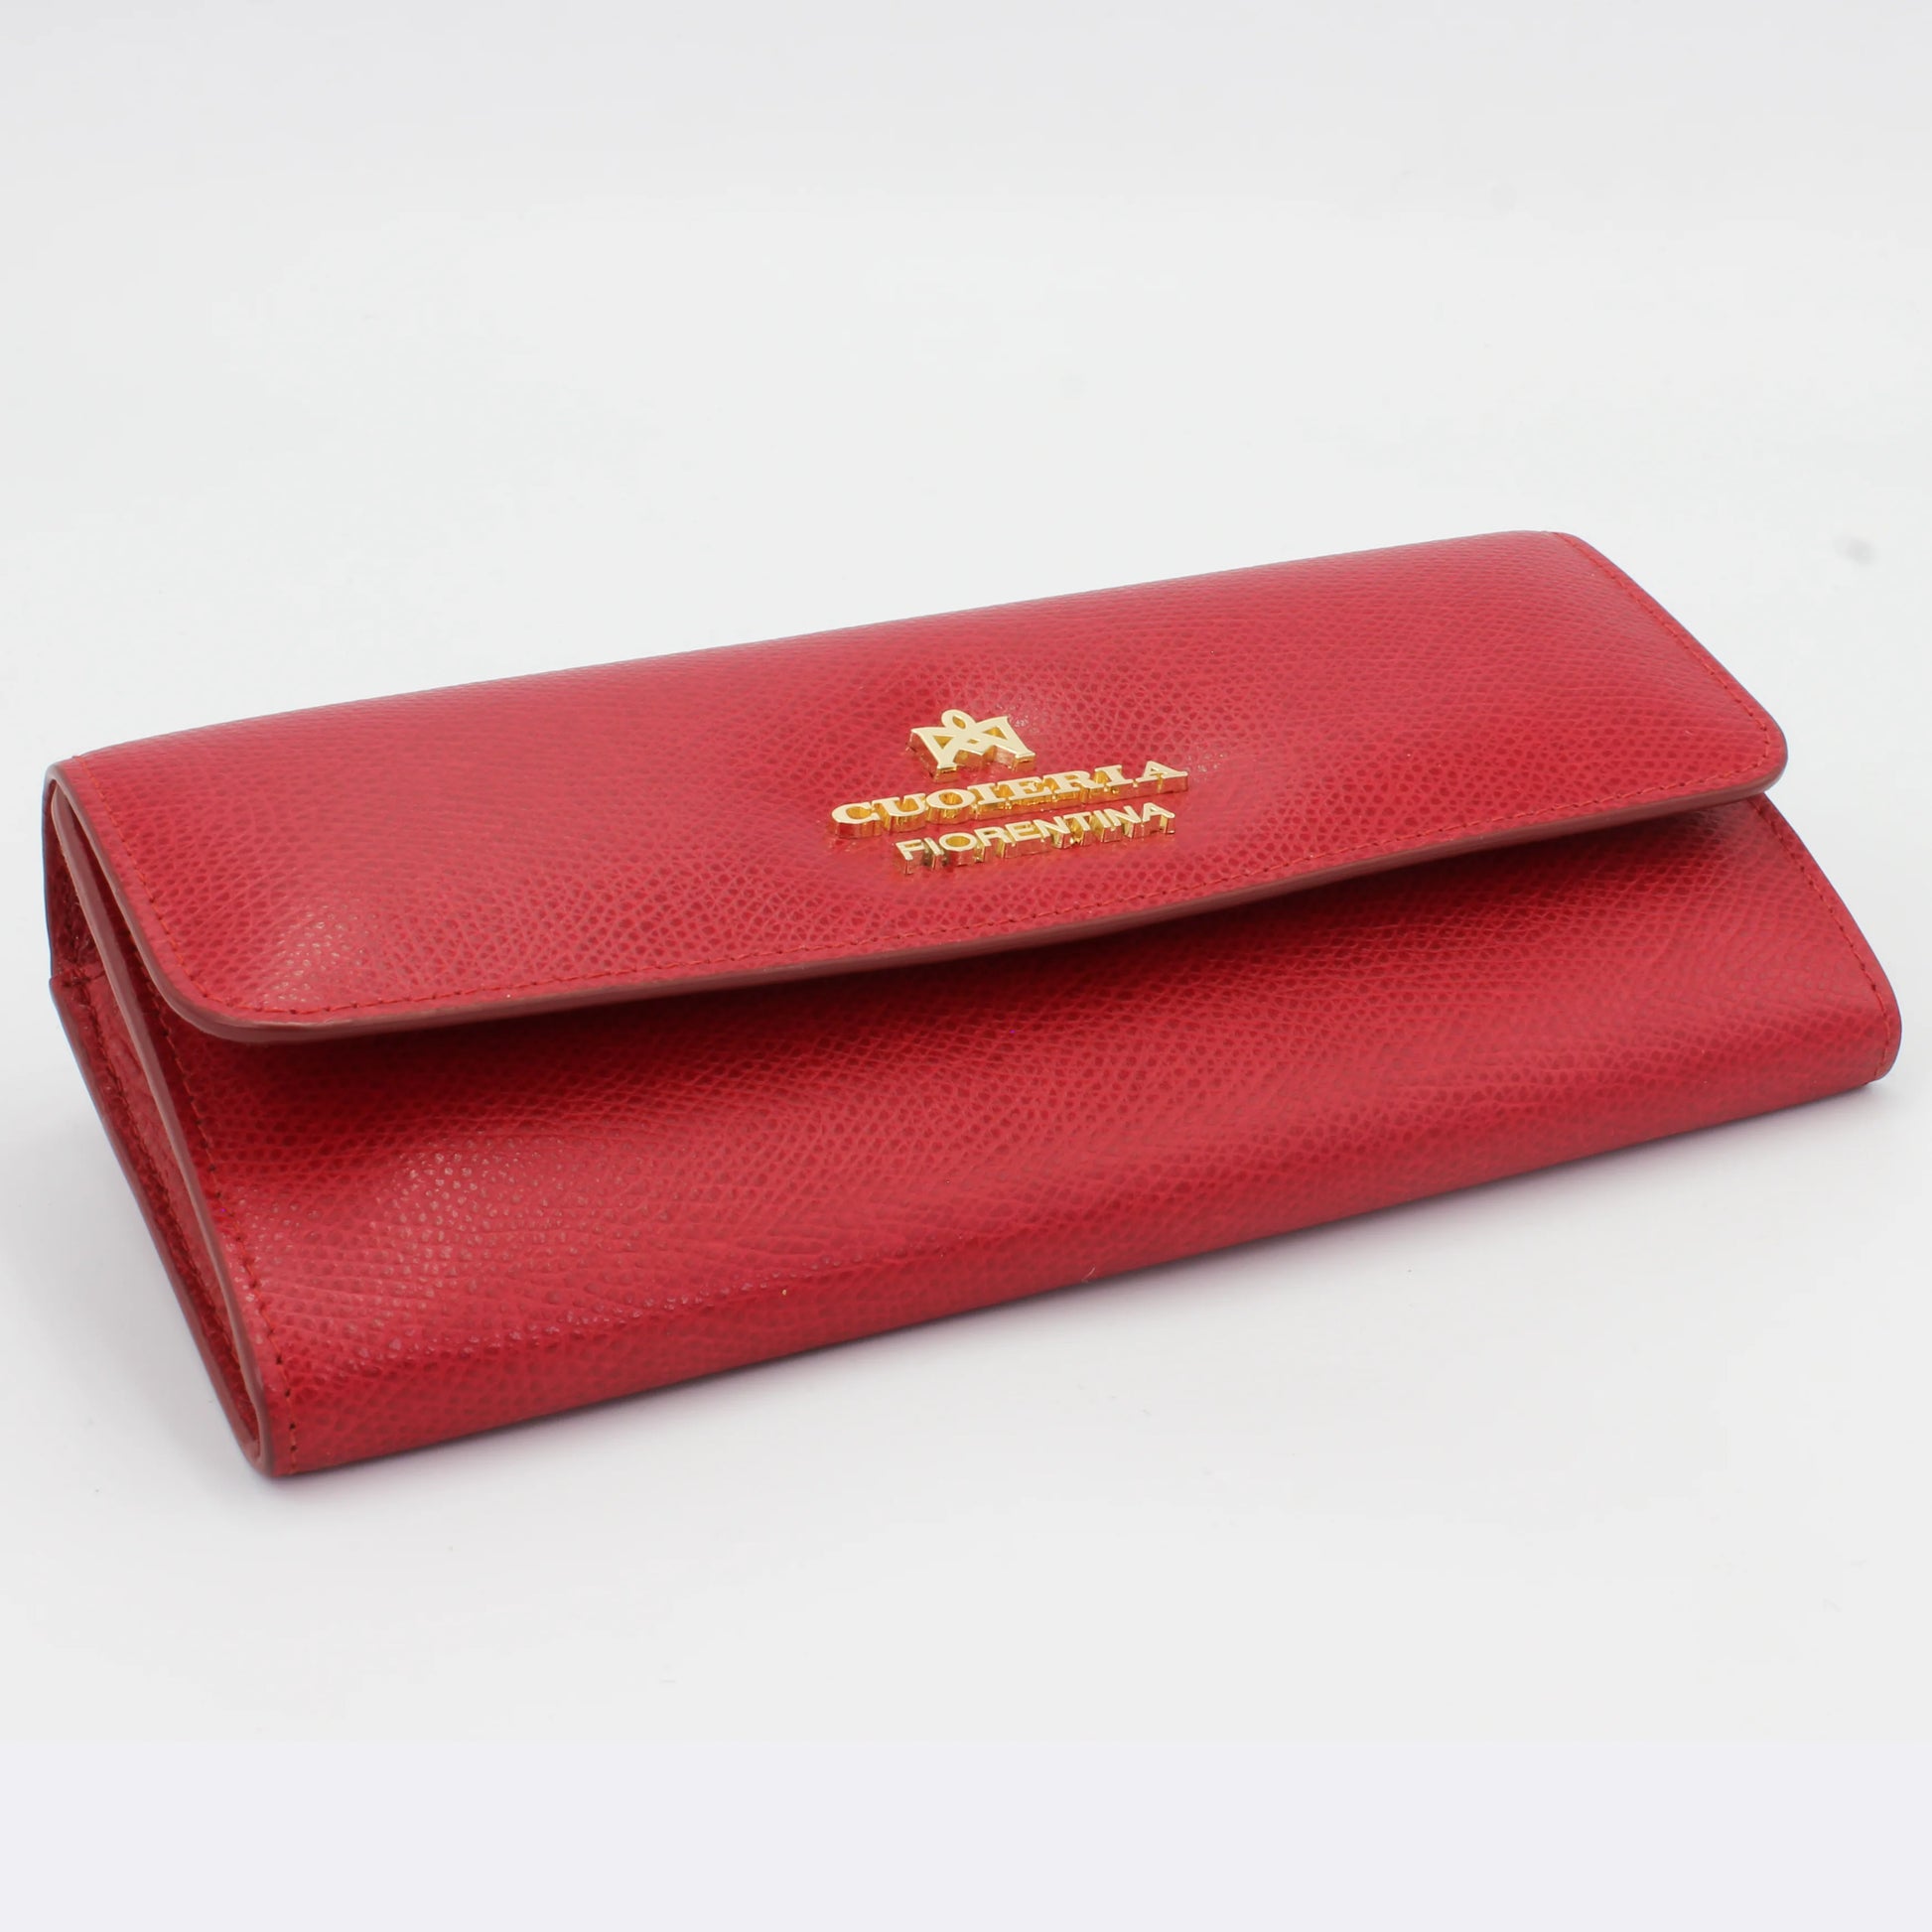 Shop our Italian-made Cuoieria Fiorentina Italian leather purse in rubino (P0000D1003420) or browse our range of Italian wallets and purses for men & women in-store at Aliverti Cape Town, or shop online.   We deliver in South Africa & offer multiple payment plans as well as accept multiple safe & secure payment methods.